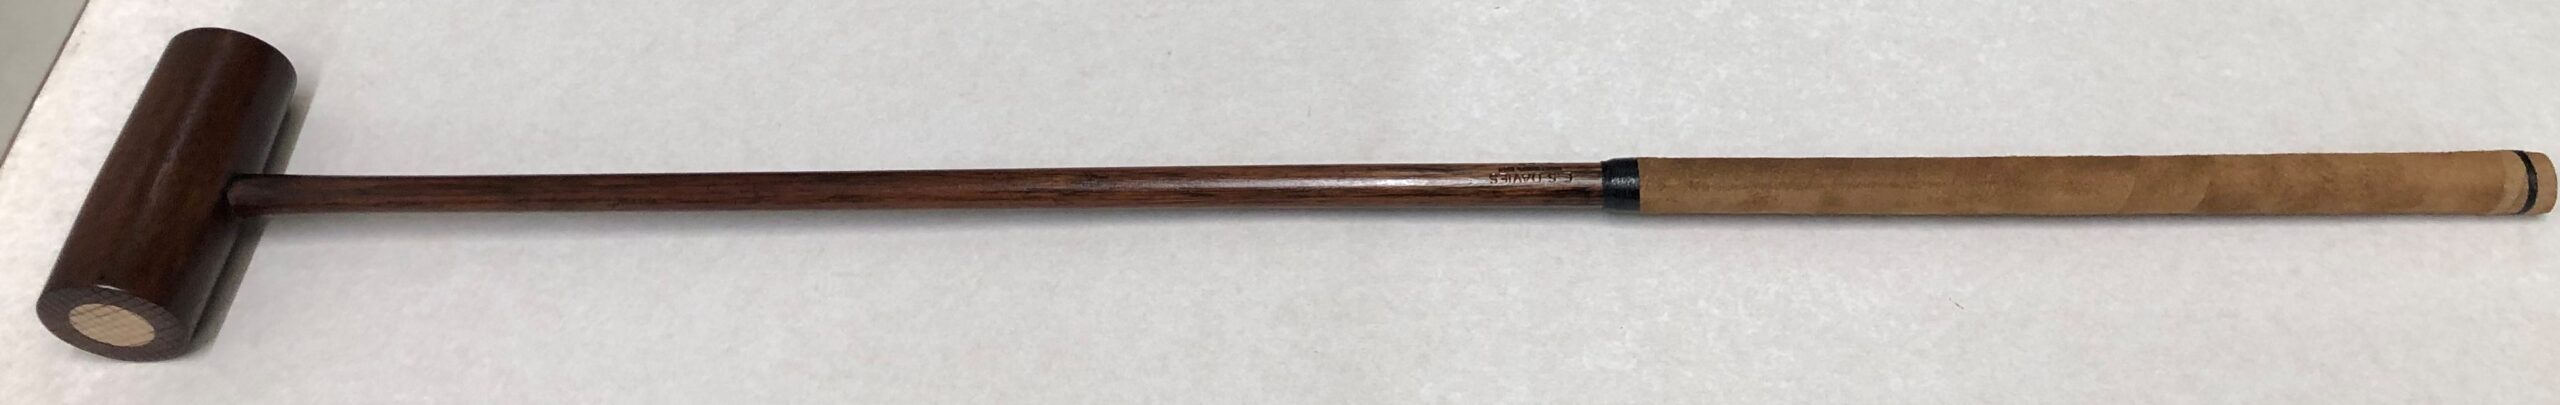 Reproduction 'McQuaker' Cylindrical Putter c.1900